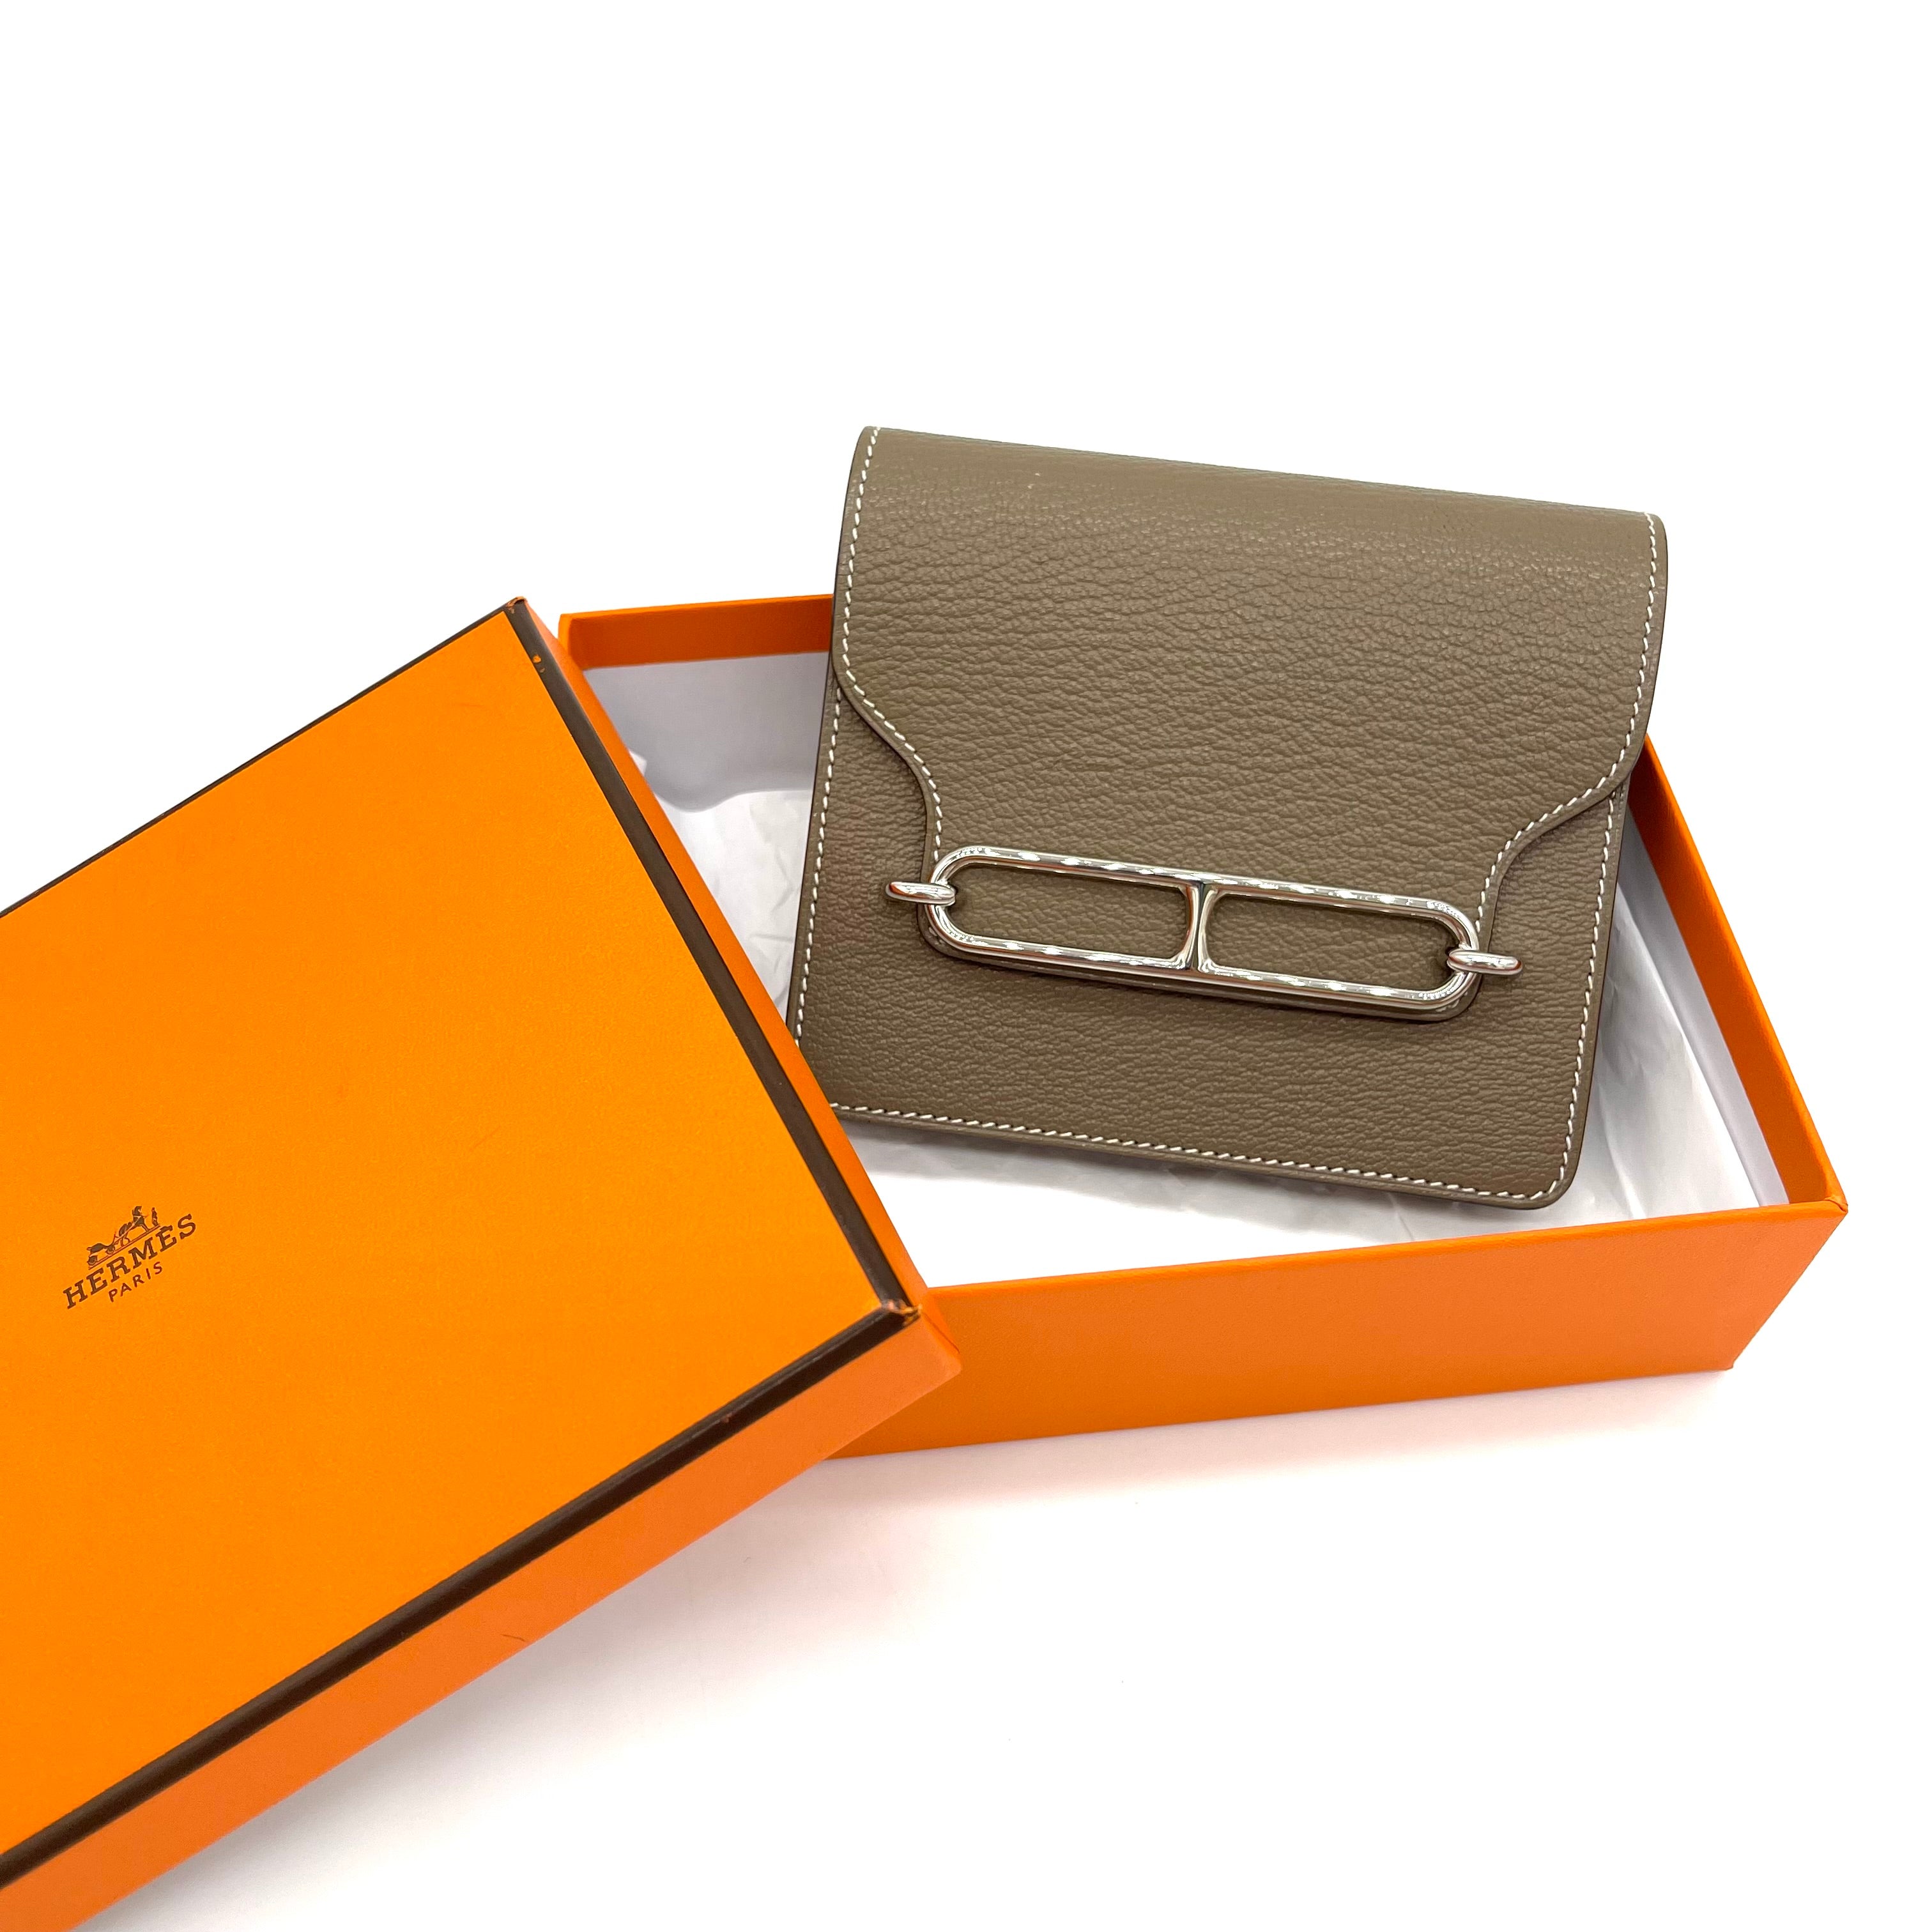 HERMES Chevre Mysore Roulis Slim Wallet Etoupe Brand New Condition Never used